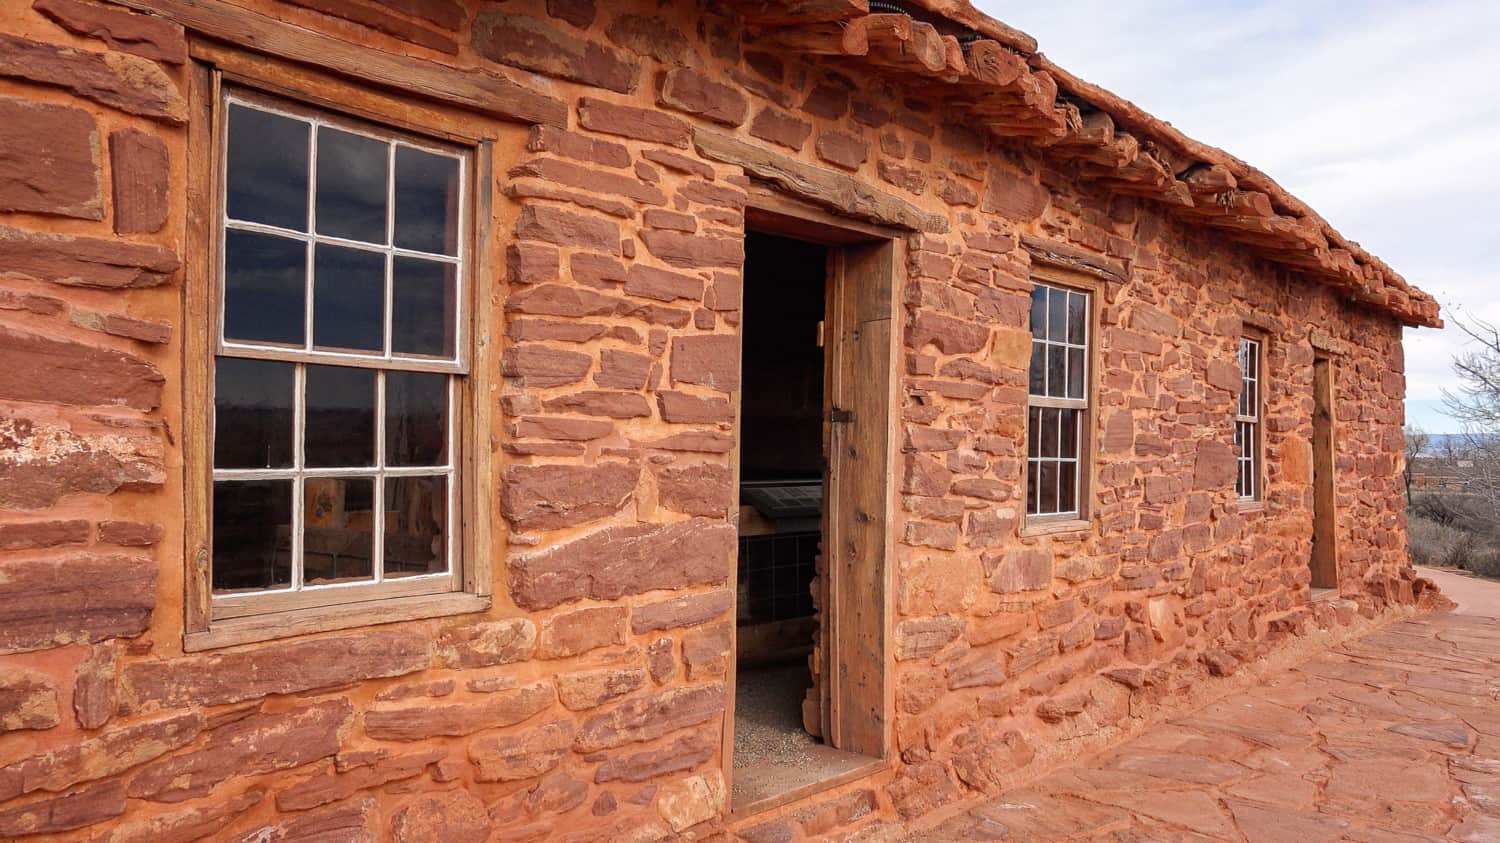 Pioneer cabin built from sandstone at Pipe Spring National Monument in Arizona